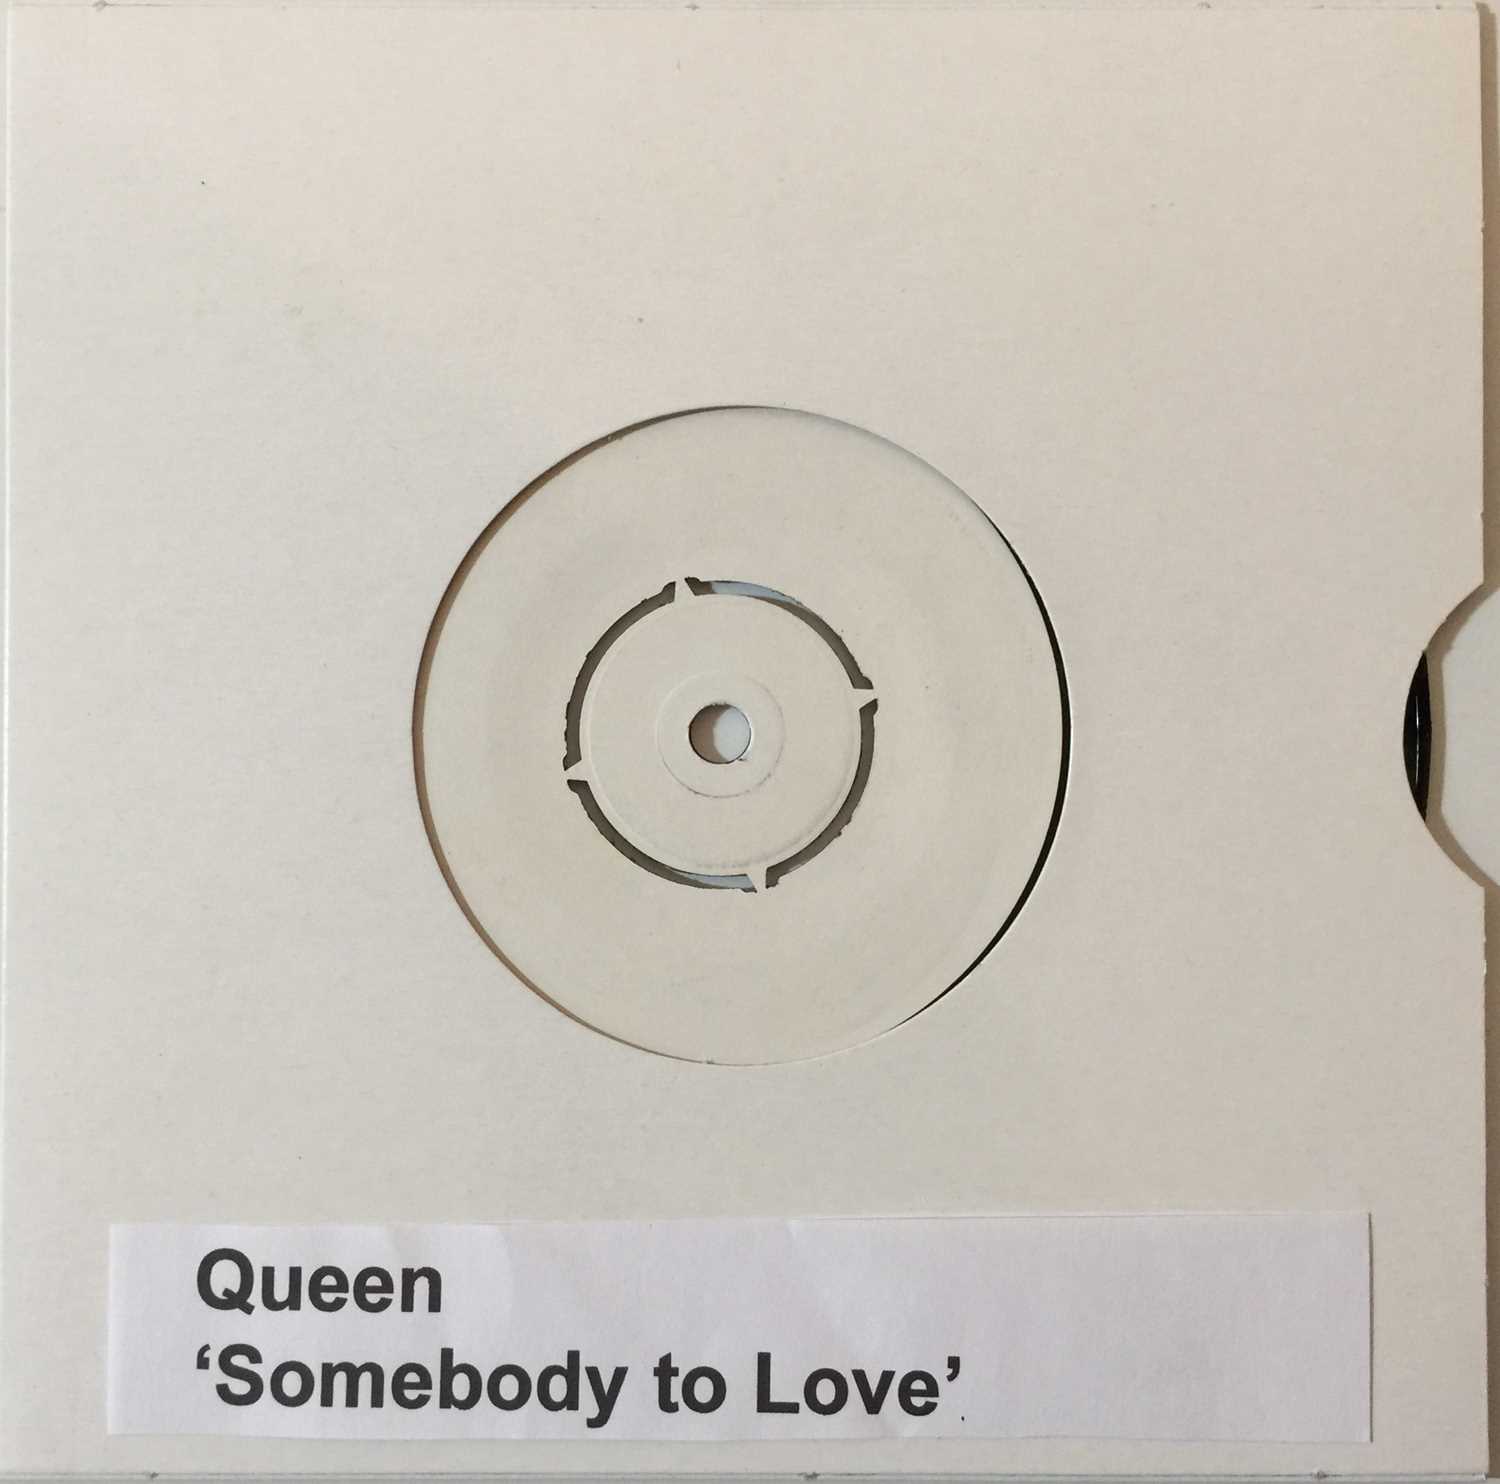 Queen - Somebody To Love 7" (UK White Label Test Pressing - EMI 2565